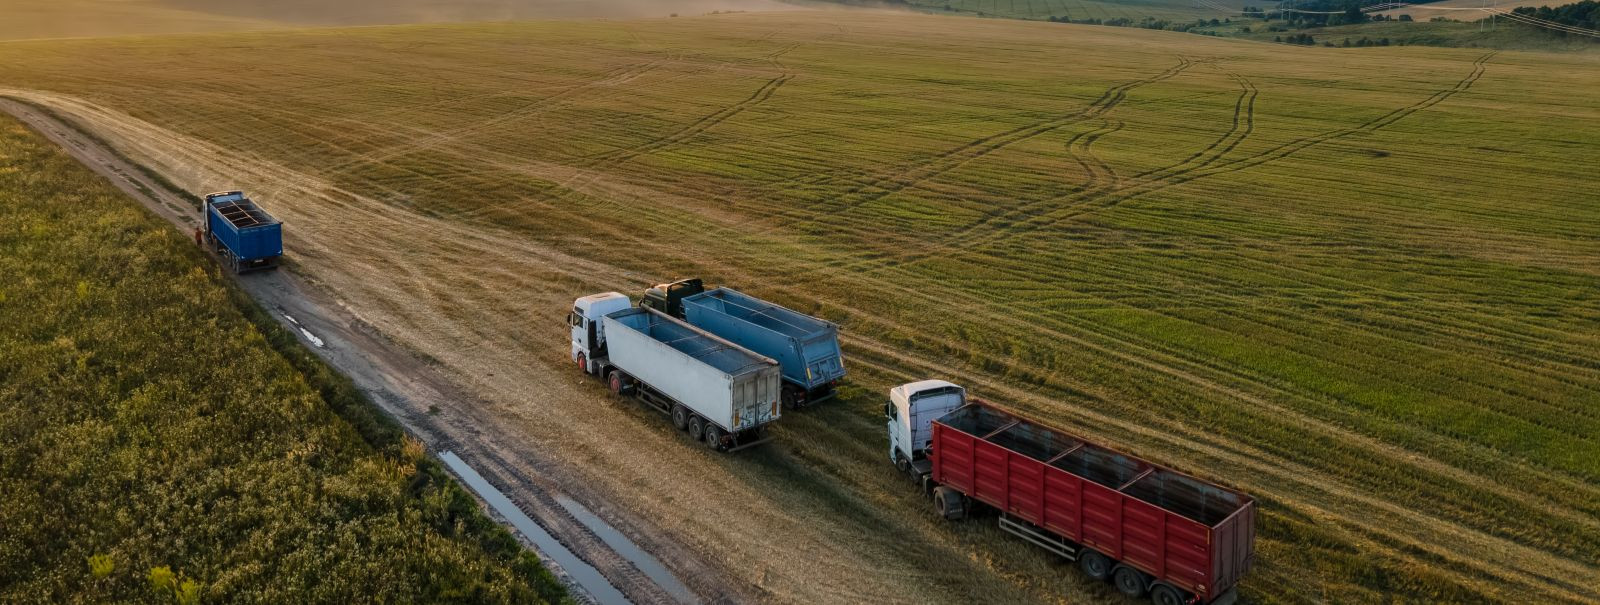 Estonia's strategic location as a gateway between East and West has historically positioned it as a hub for international freight transport. With a robust netwo